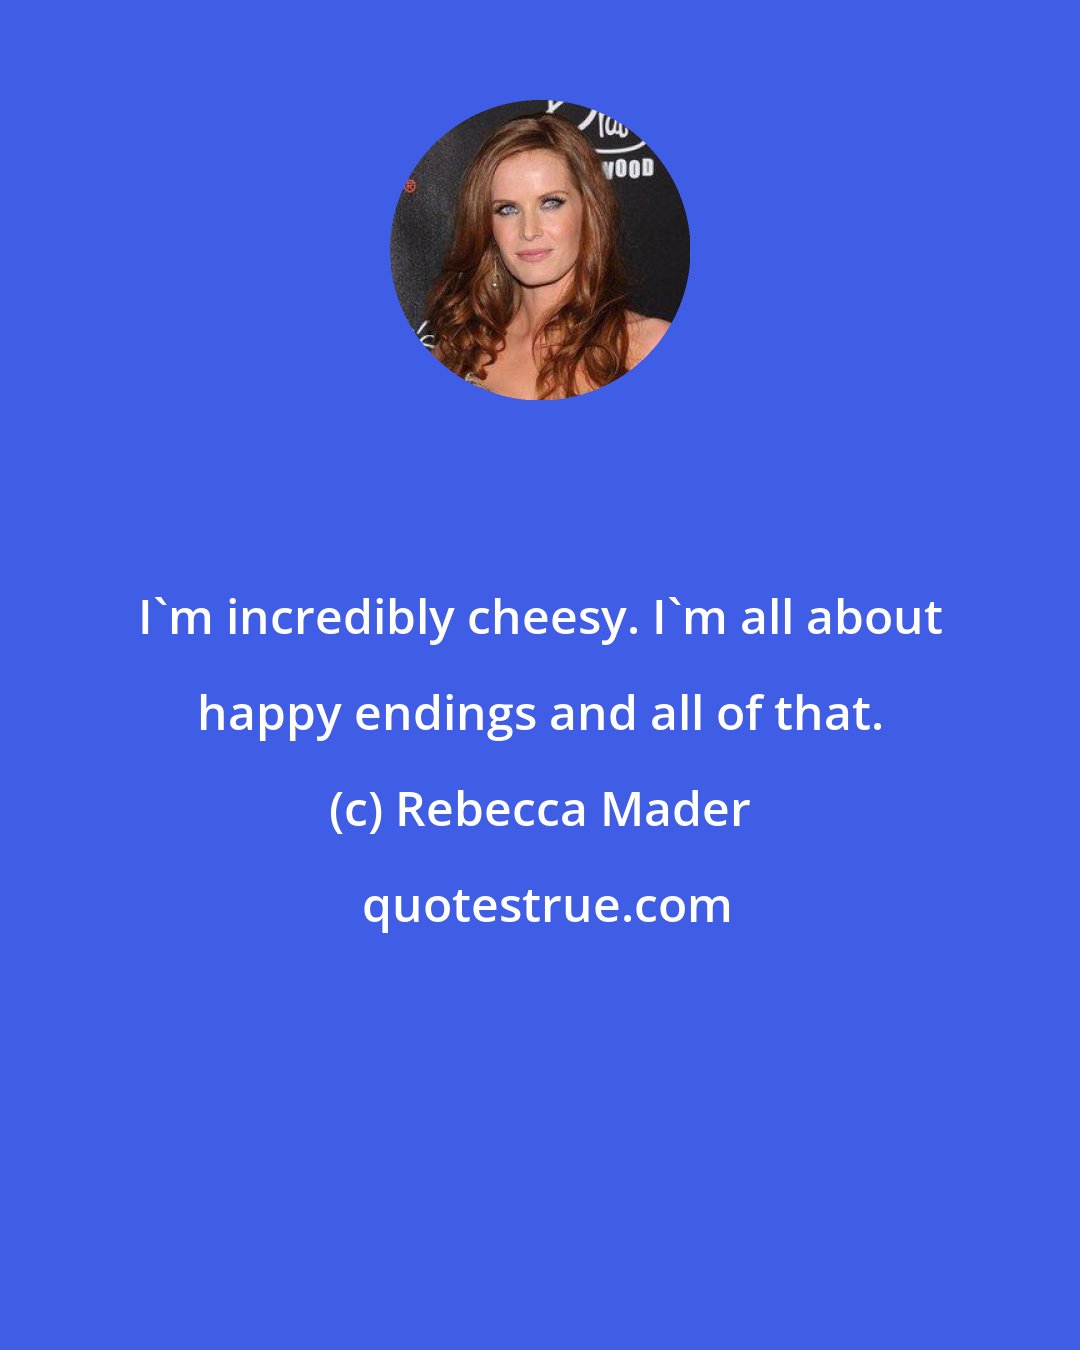 Rebecca Mader: I'm incredibly cheesy. I'm all about happy endings and all of that.